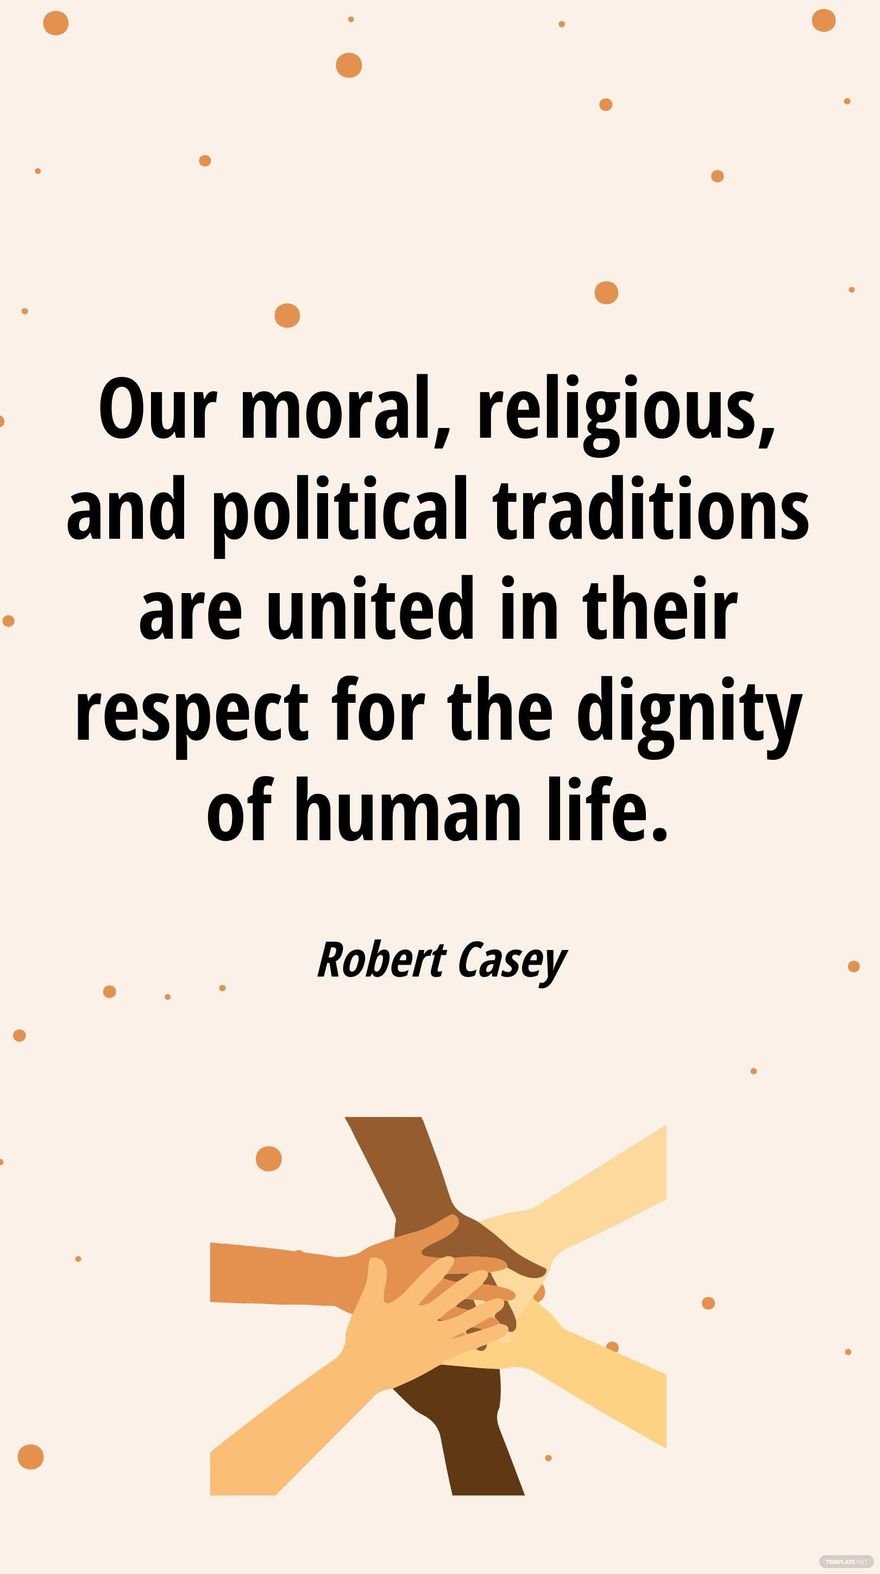 Robert Casey - Our moral, religious, and political traditions are united in their respect for the dignity of human life.